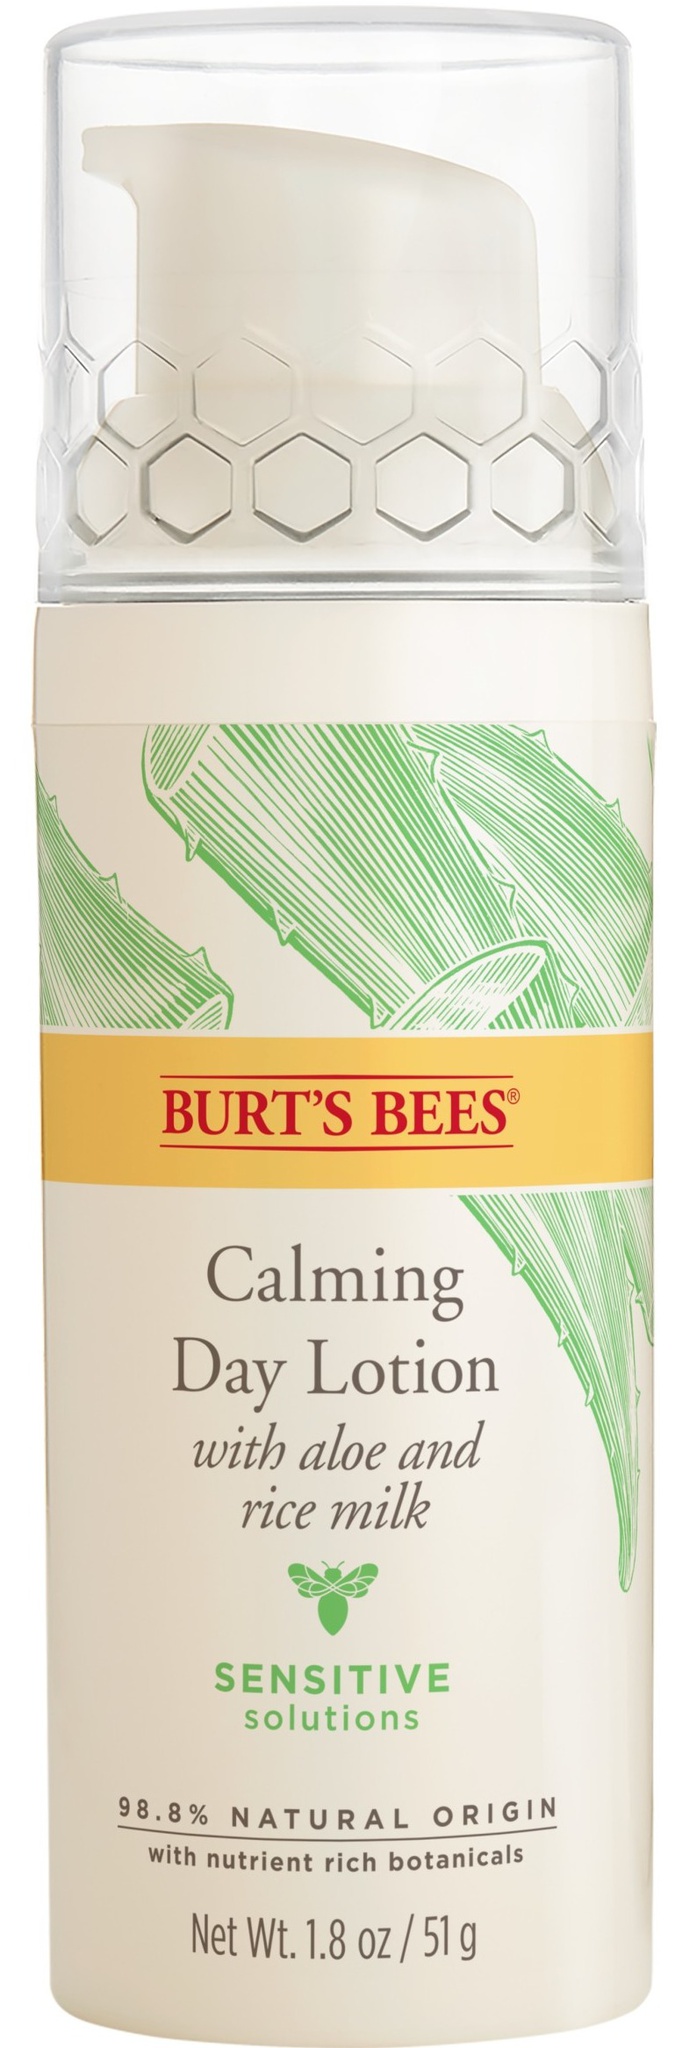 Burt's Bees Sensitive Solutions Calming Day Lotion With Aloe And Rice Milk